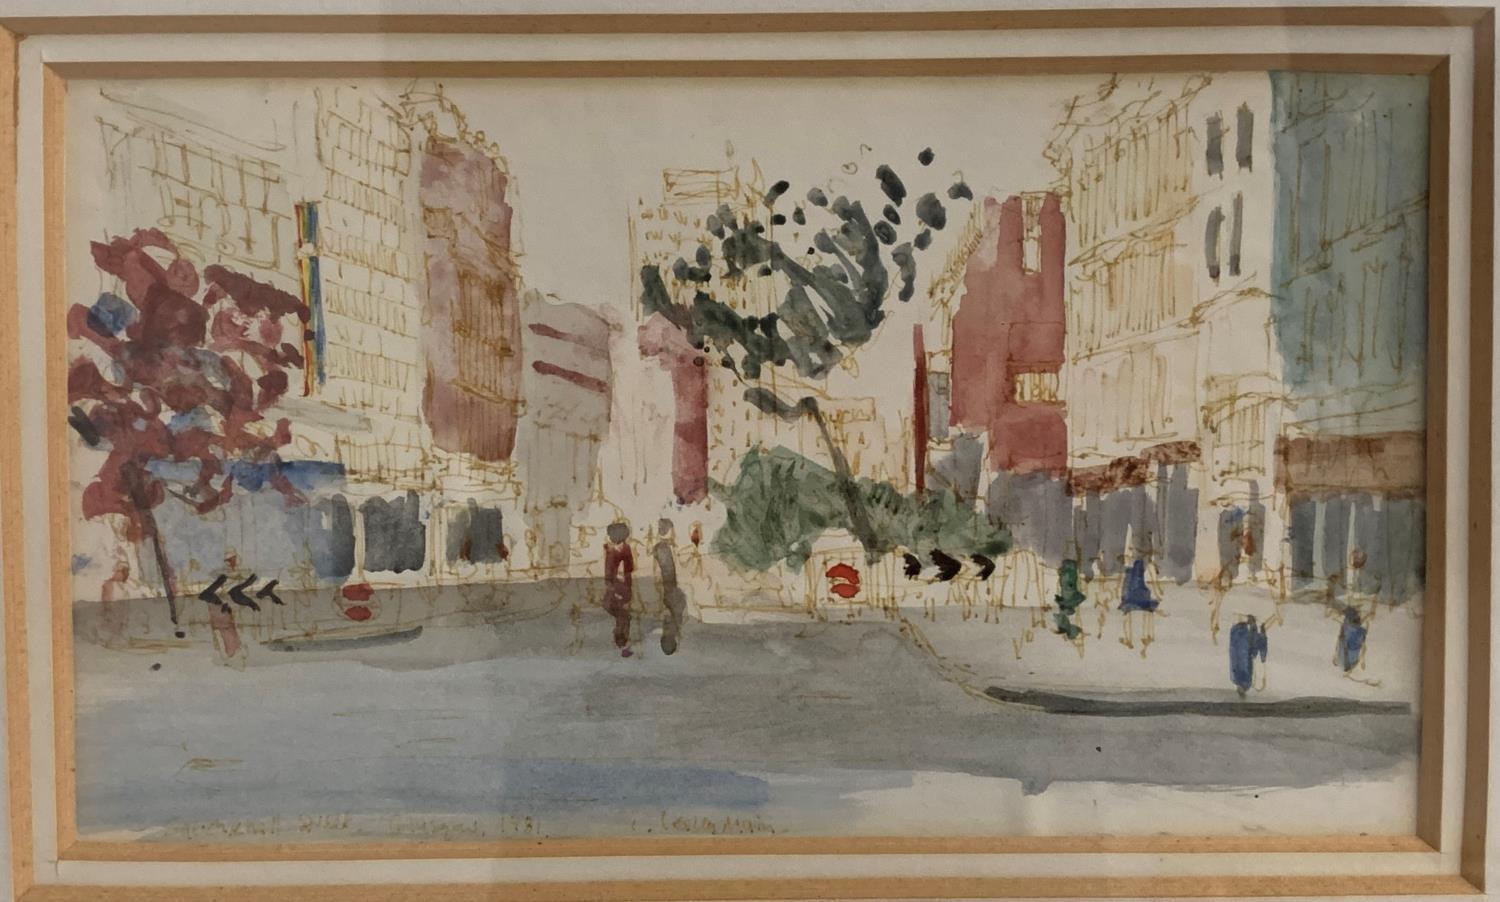 I. LESLEY MAIN Sauchiehall Street, Glasgow, watercolour, signed and dated 1981, 11.7cm x 21cm - Image 2 of 2